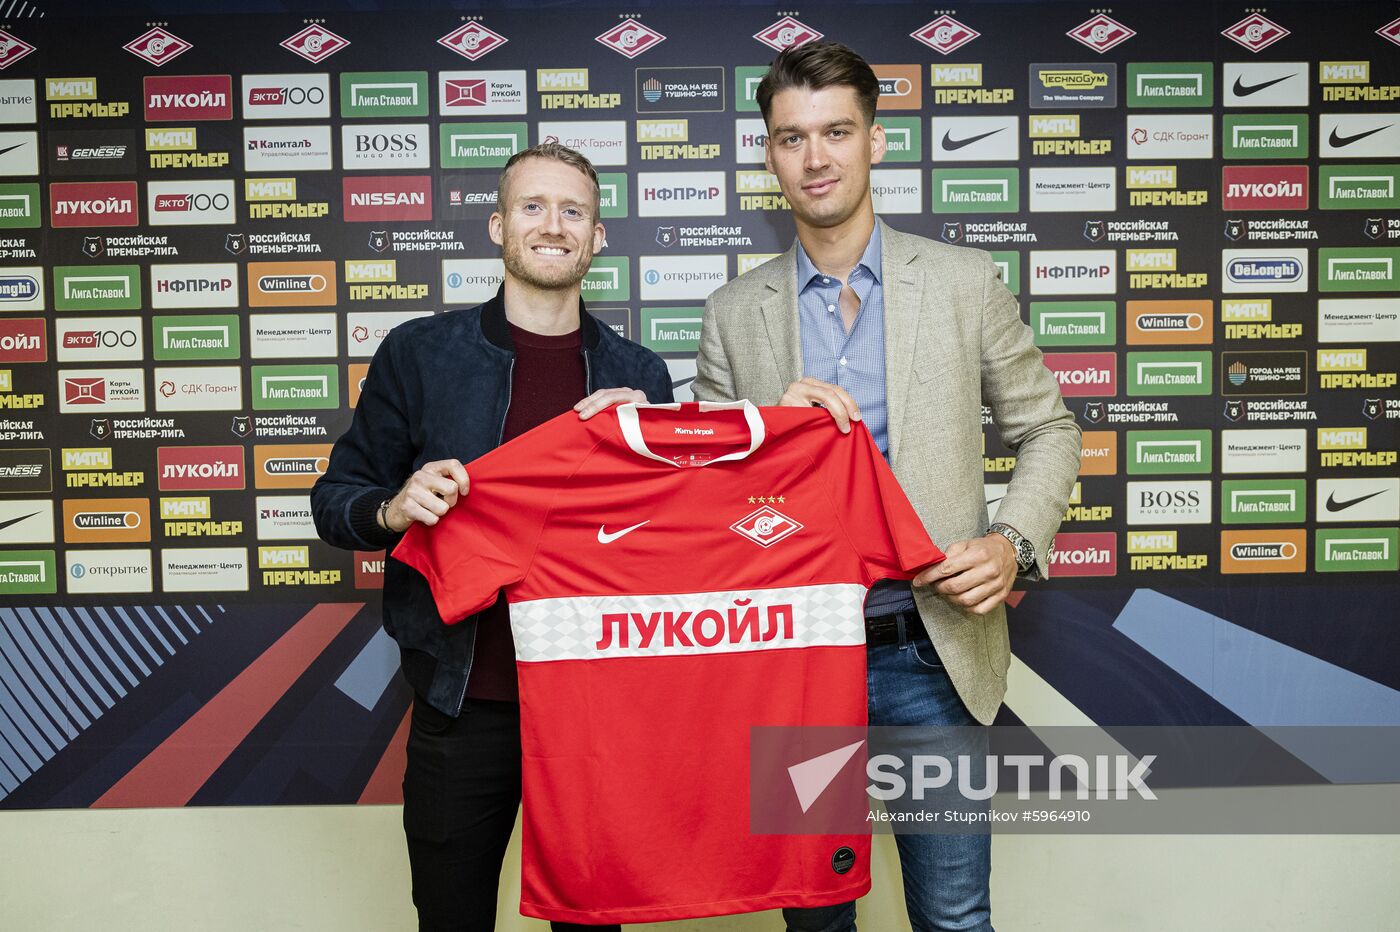 Russia Spartak New Player